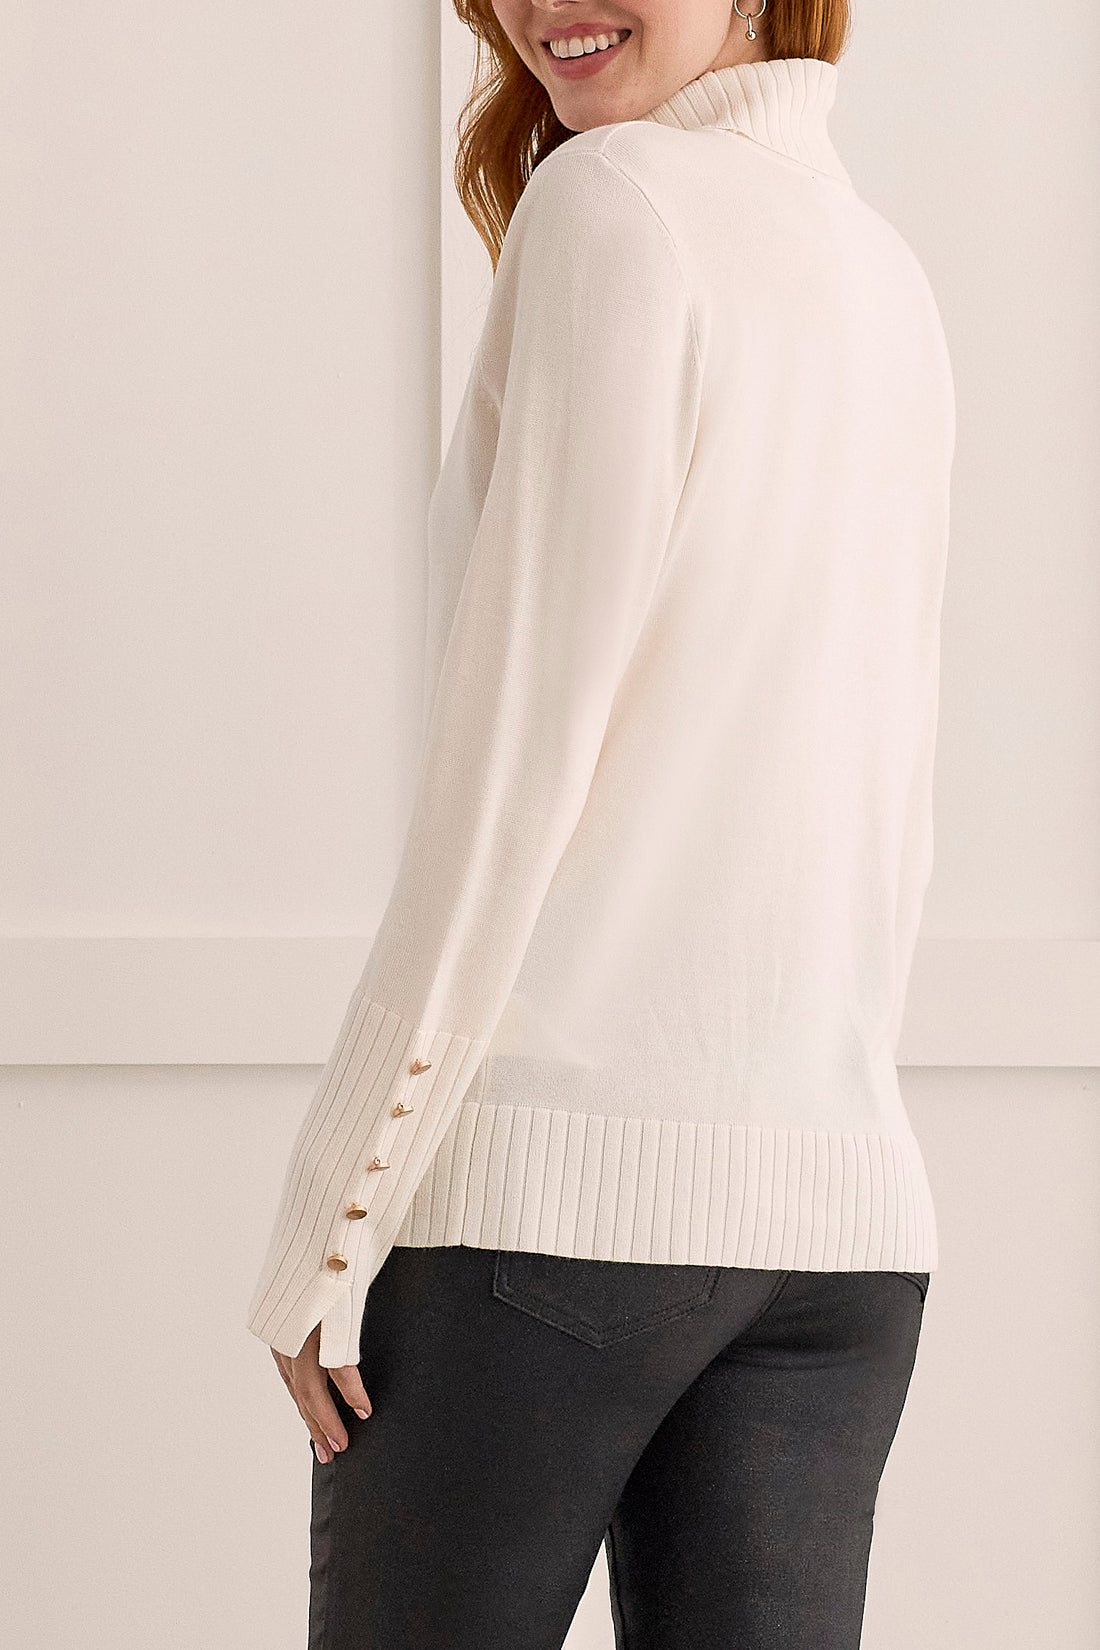 Turtleneck Sweater With Button Detail 1490O-835